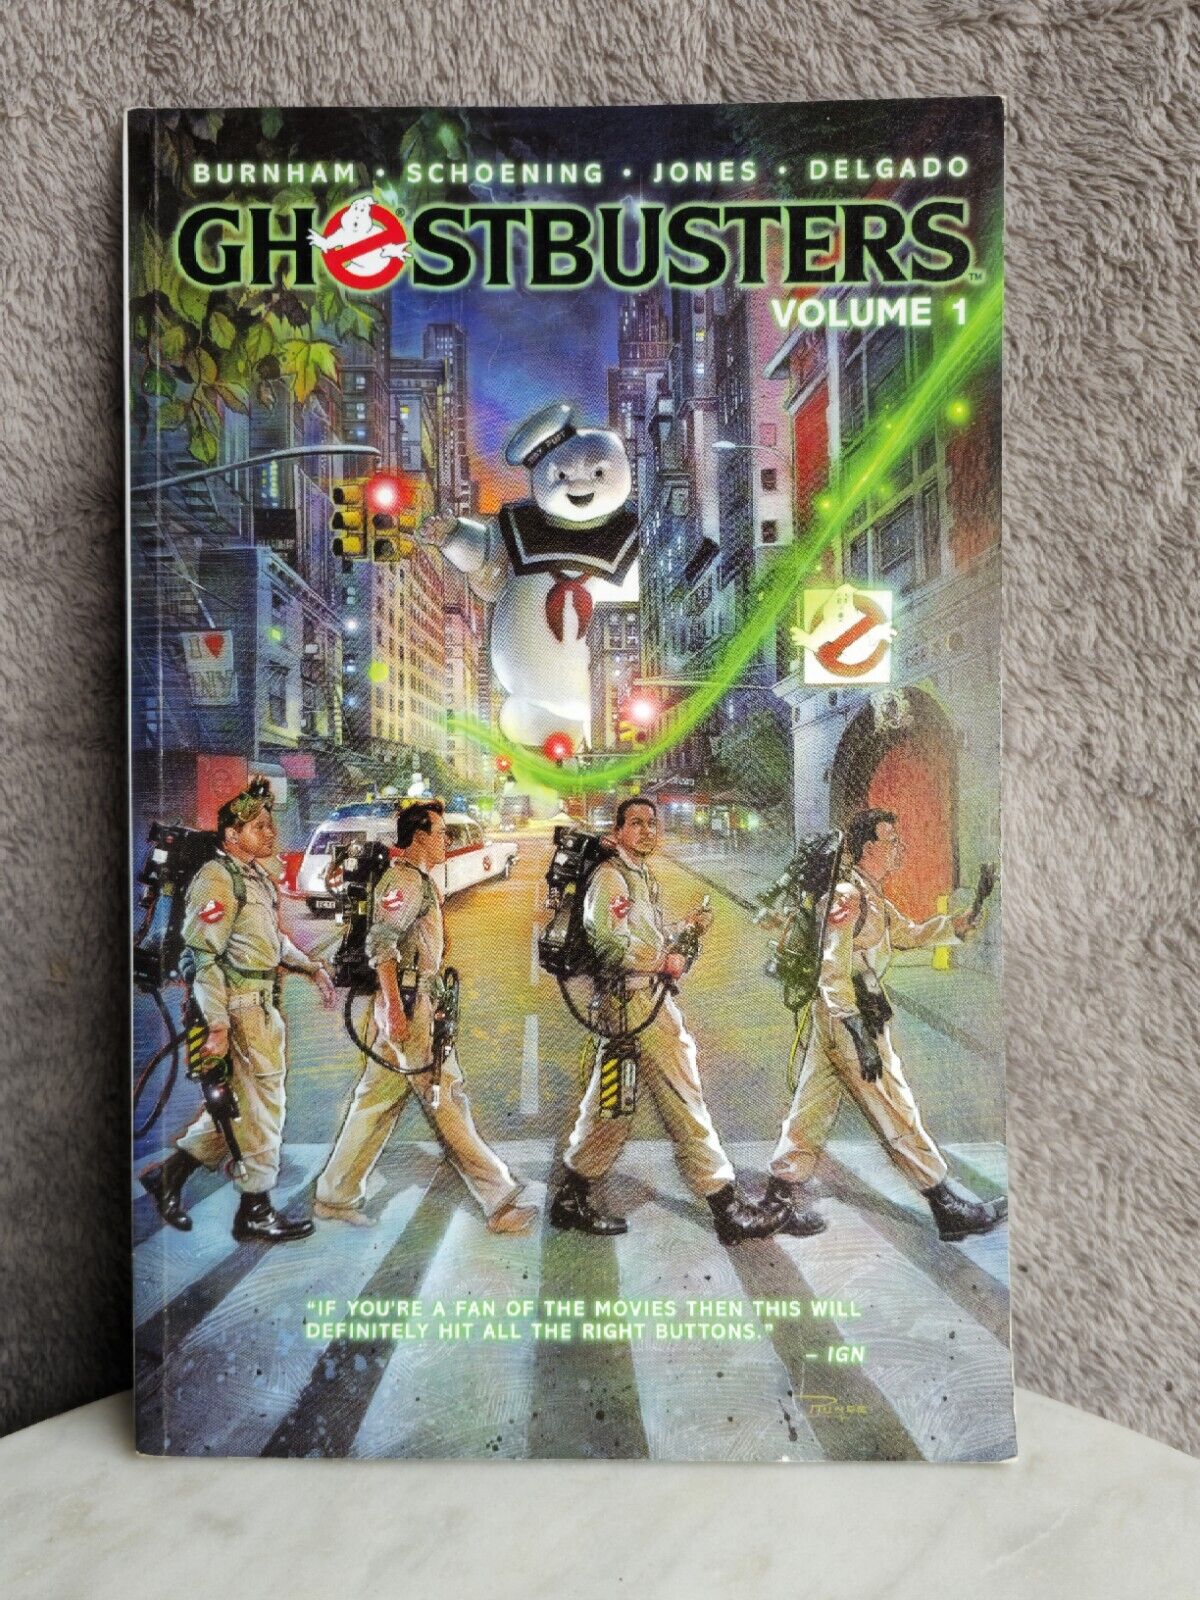 Ghostbusters Vol. 1 (2012) IDW Comics Softcover TPB